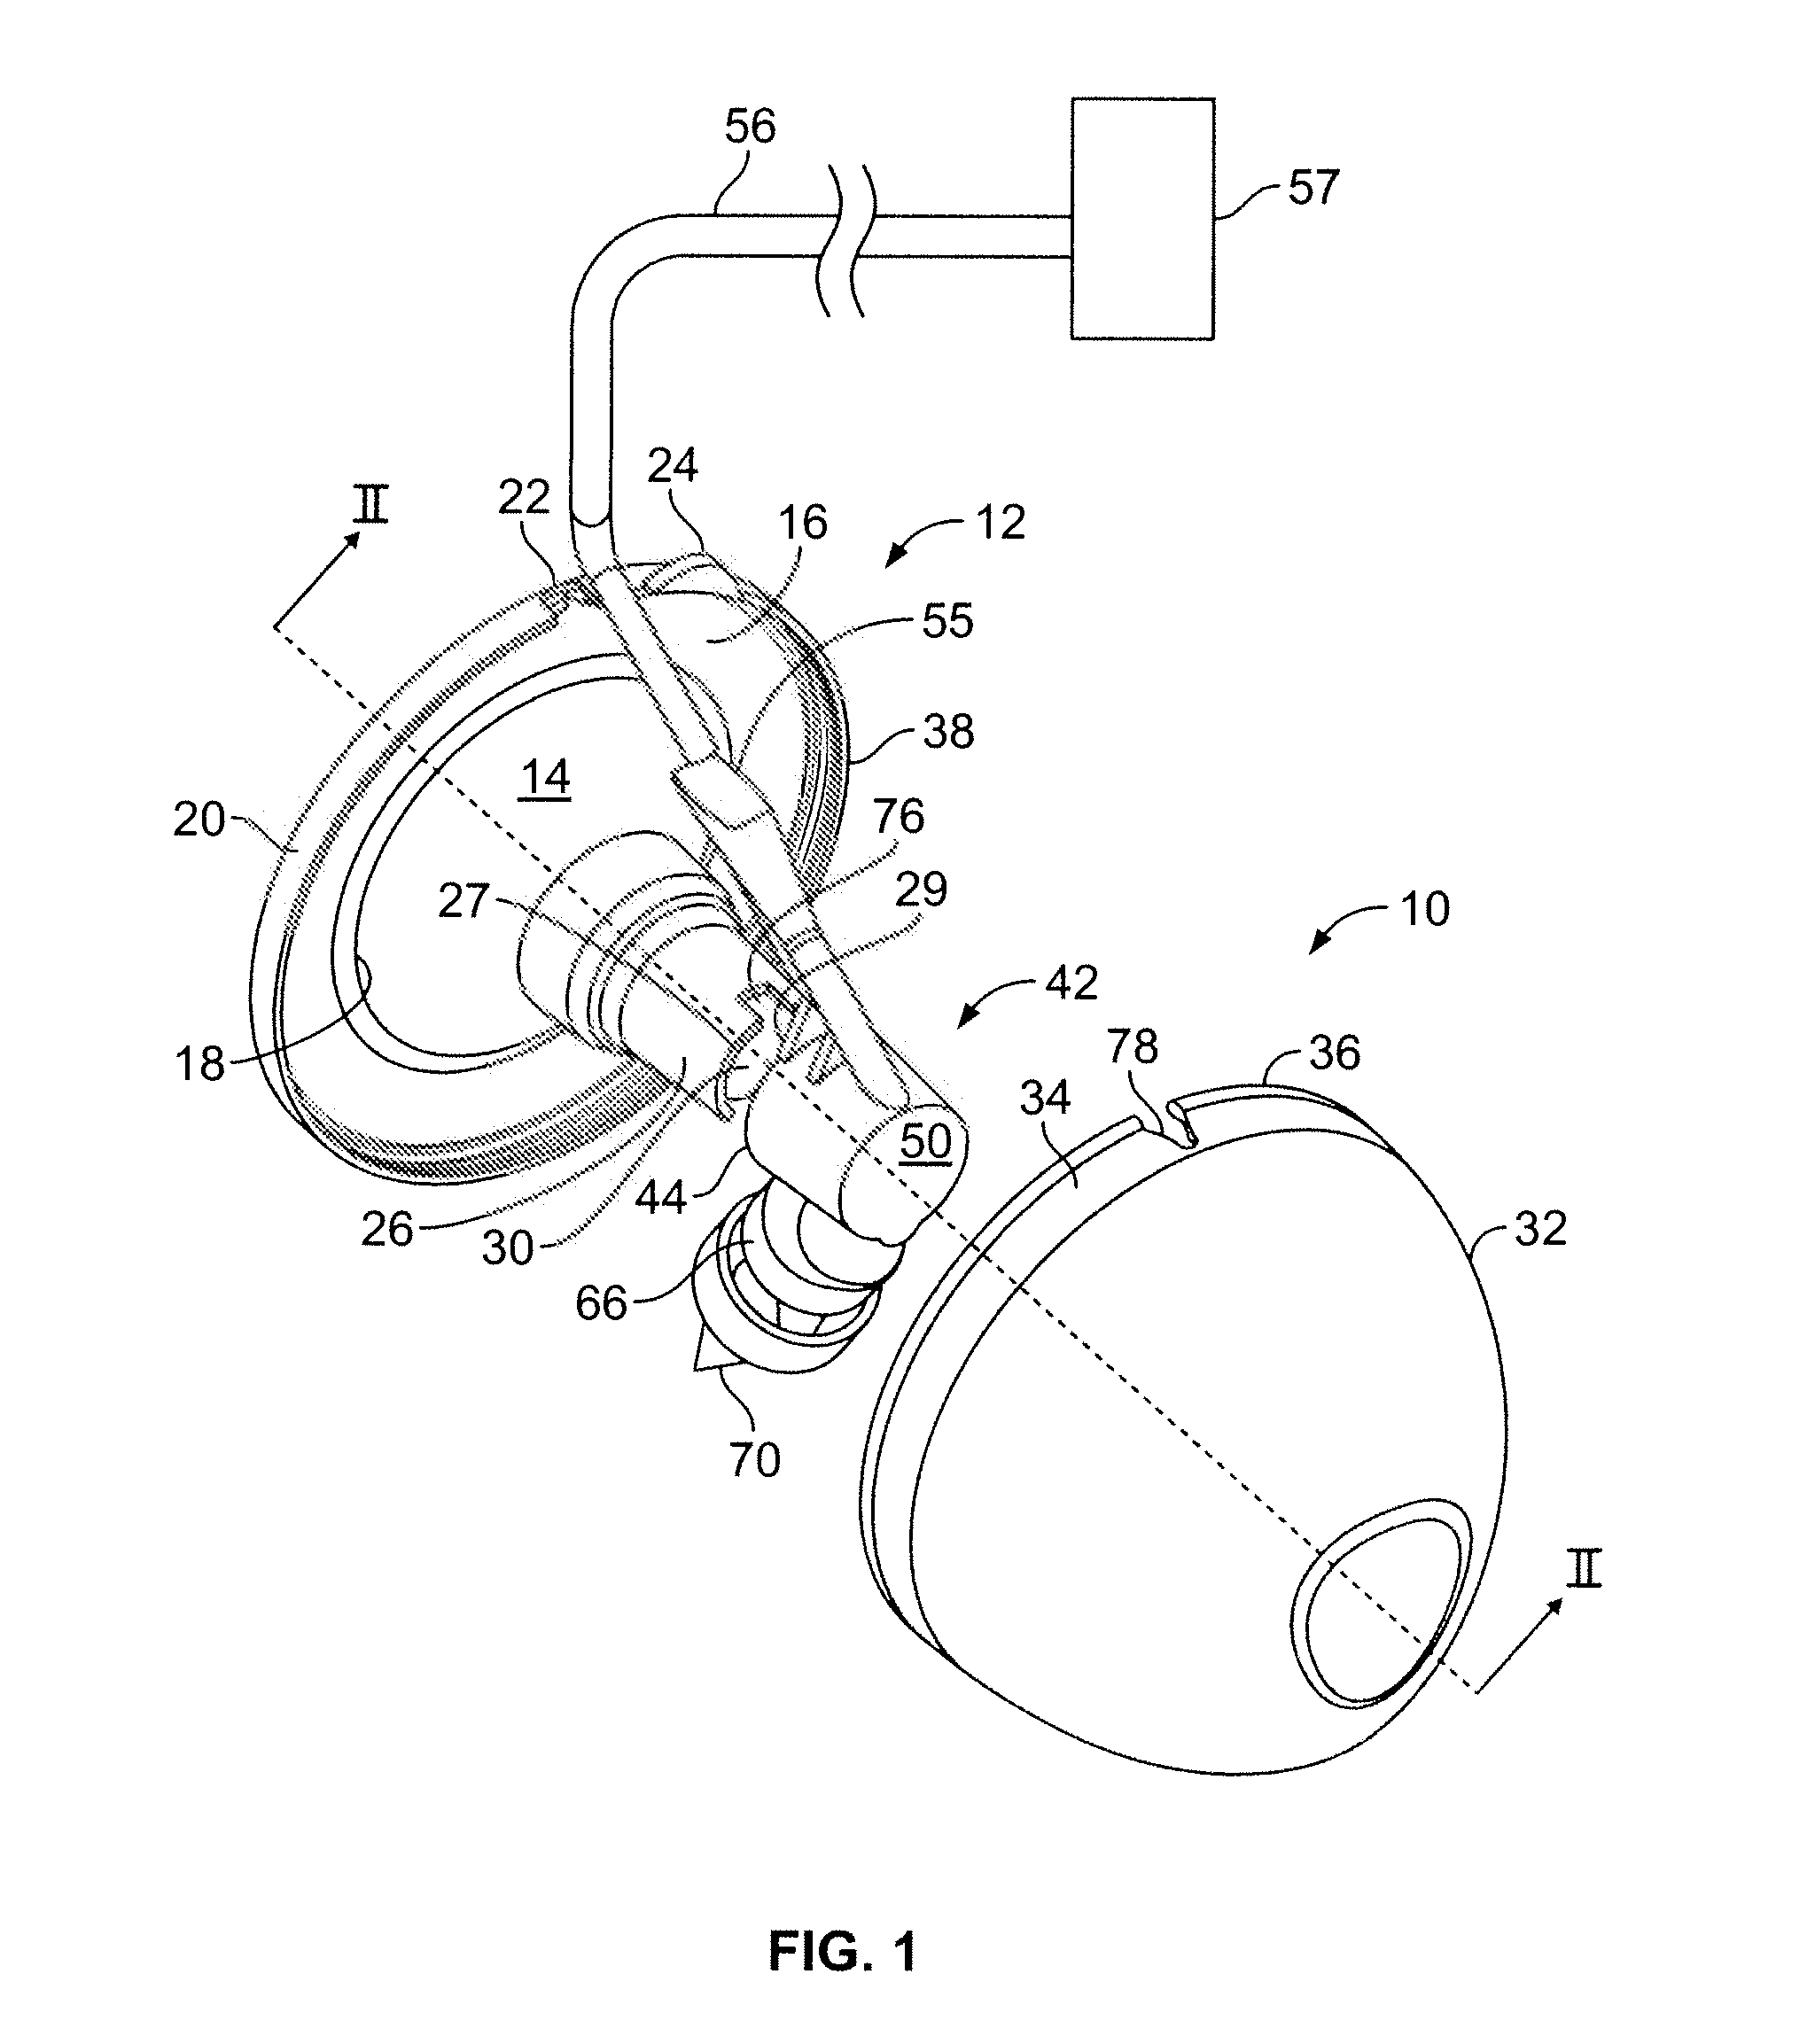 Submersible Valve for a Breast Milk Collection Device with Self Contained Reservoir